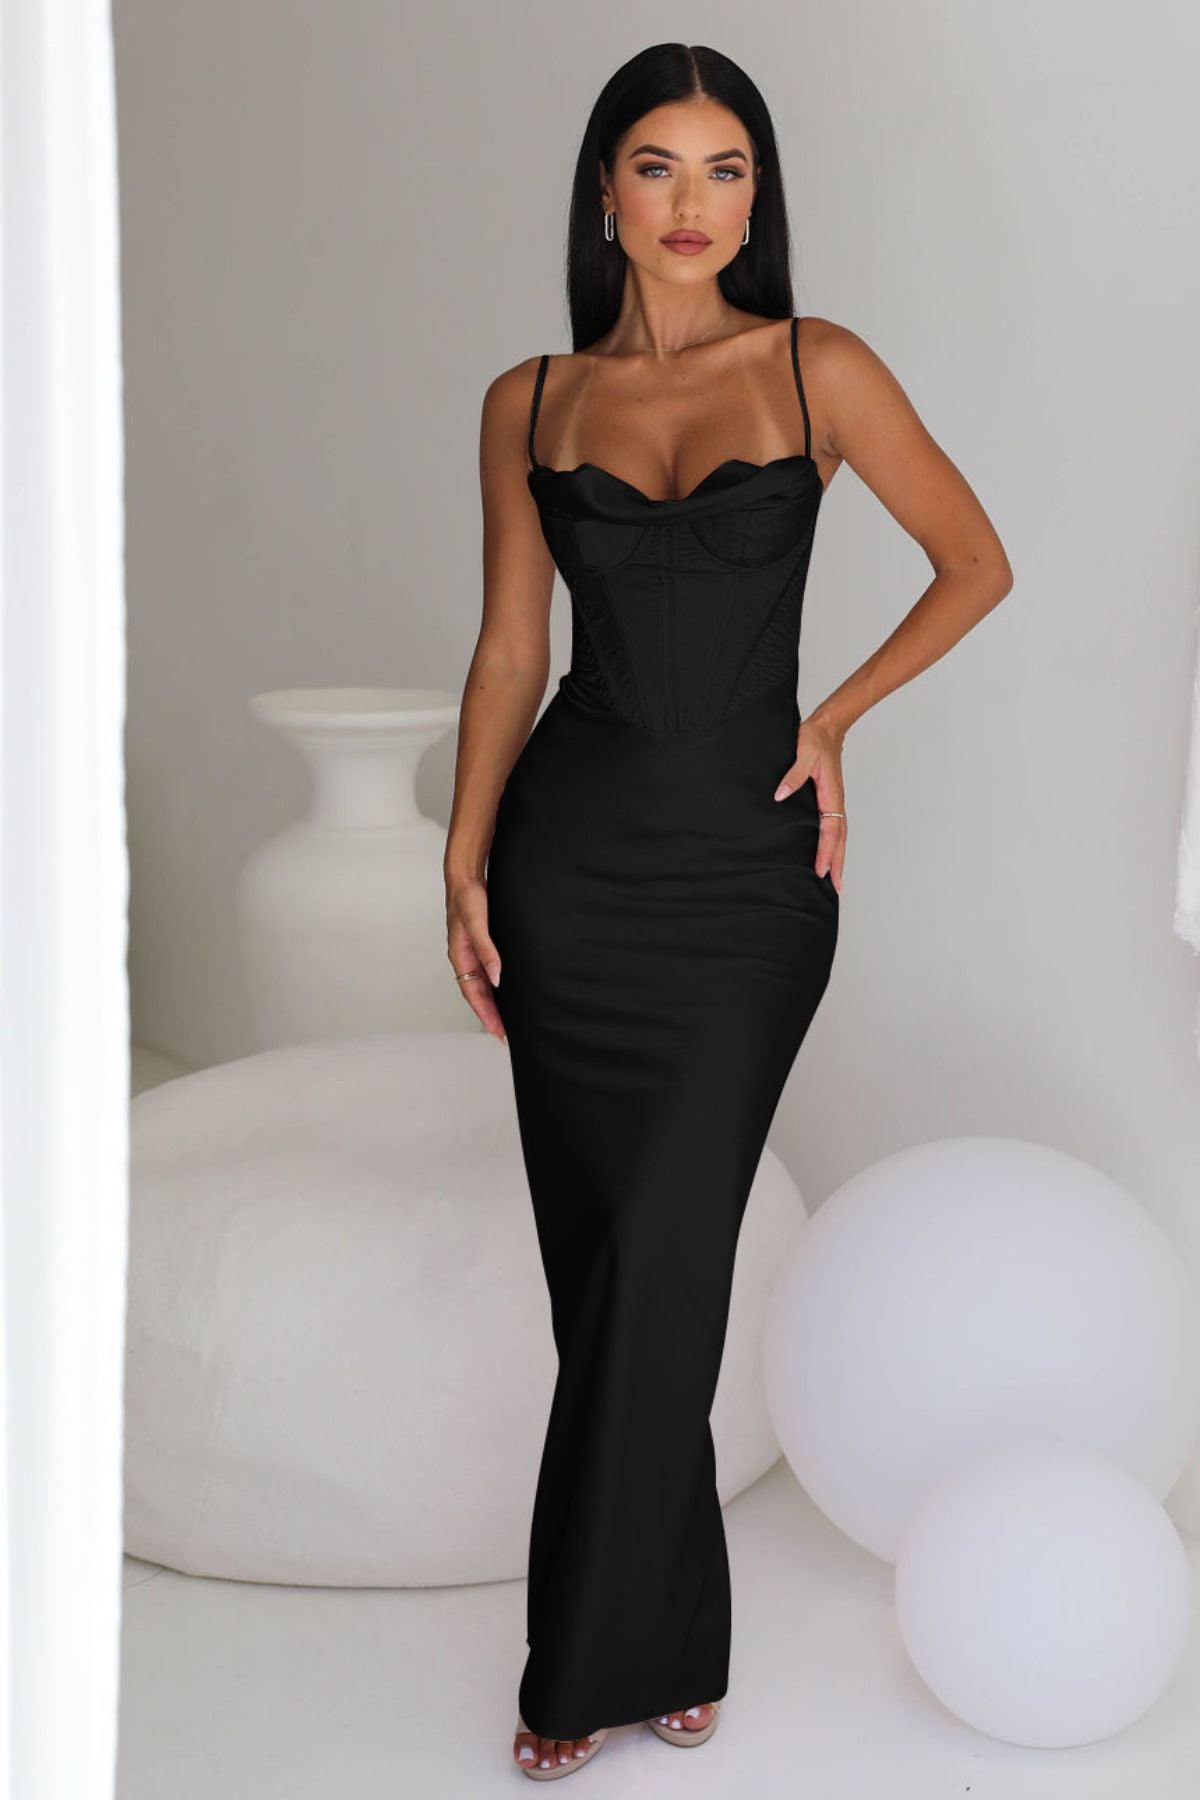 HOUSE OF CB Charmaine Corset Gown (Black) - RRP $389 | Dress for a Night